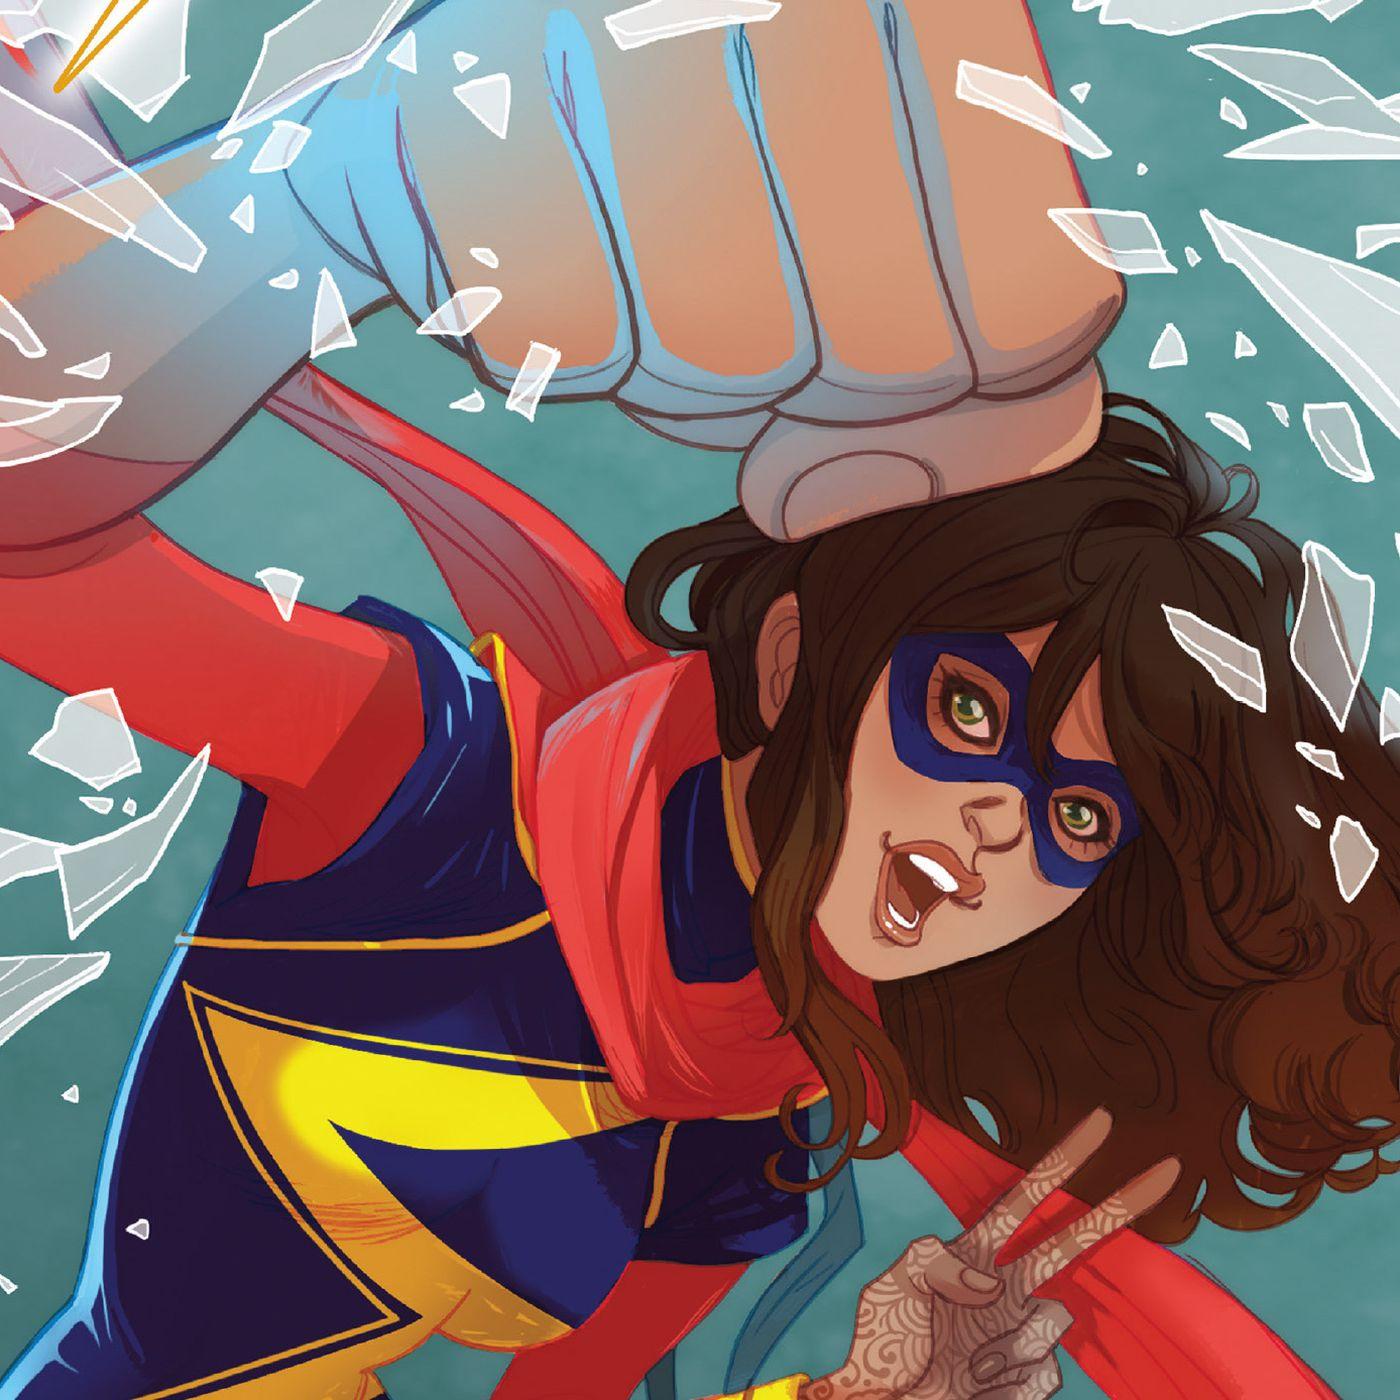 Ms Marvel 2020 Wallpapers